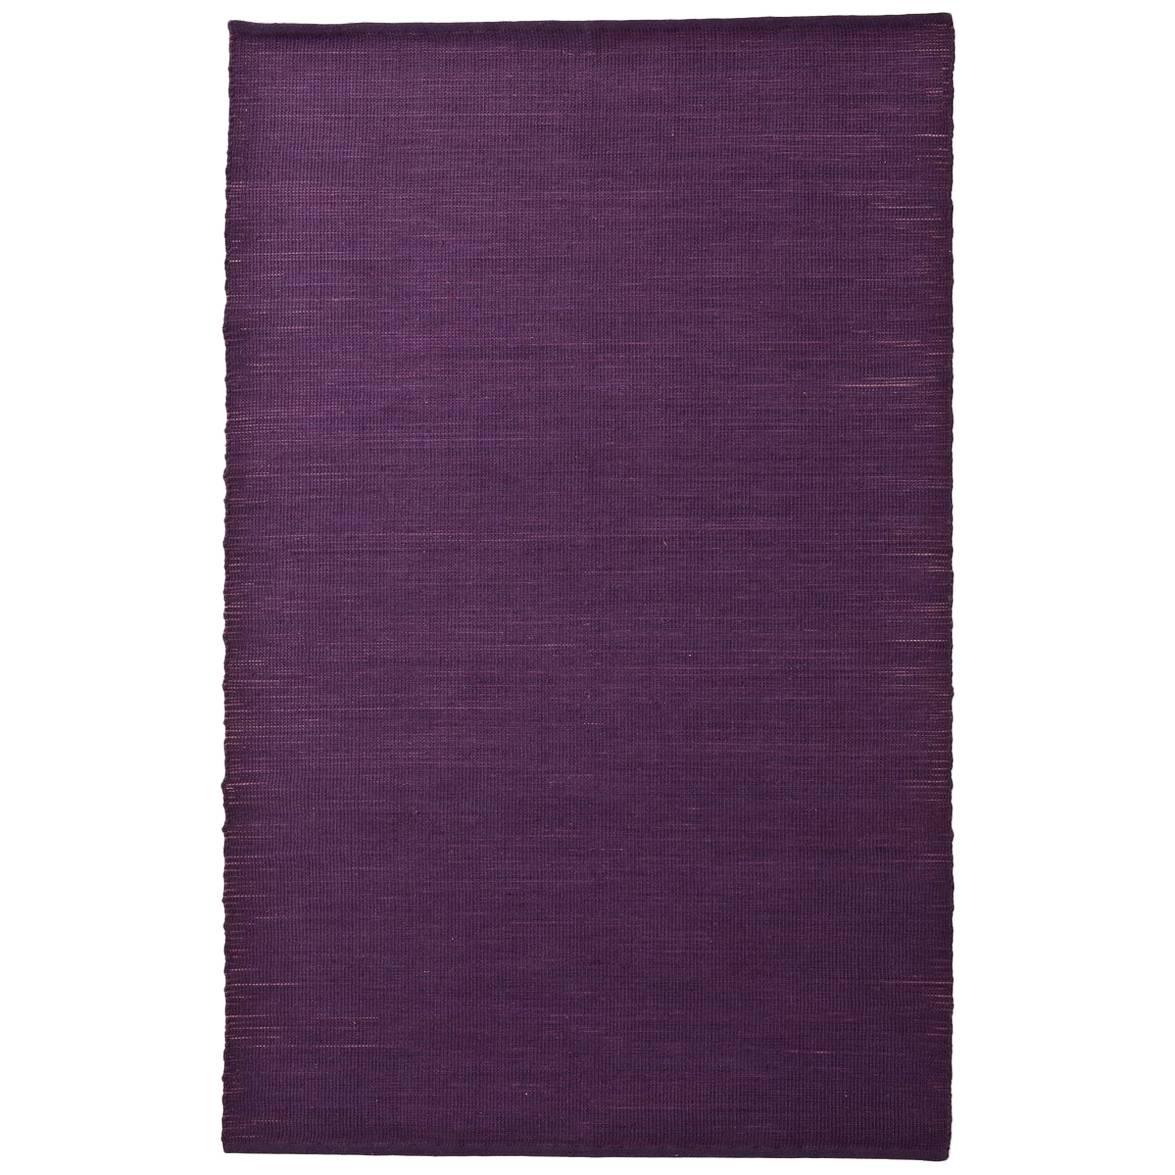 Tatami  Purple Wool and Jute Rug by Nani Marquina & Ariadna Miquel, Small For Sale